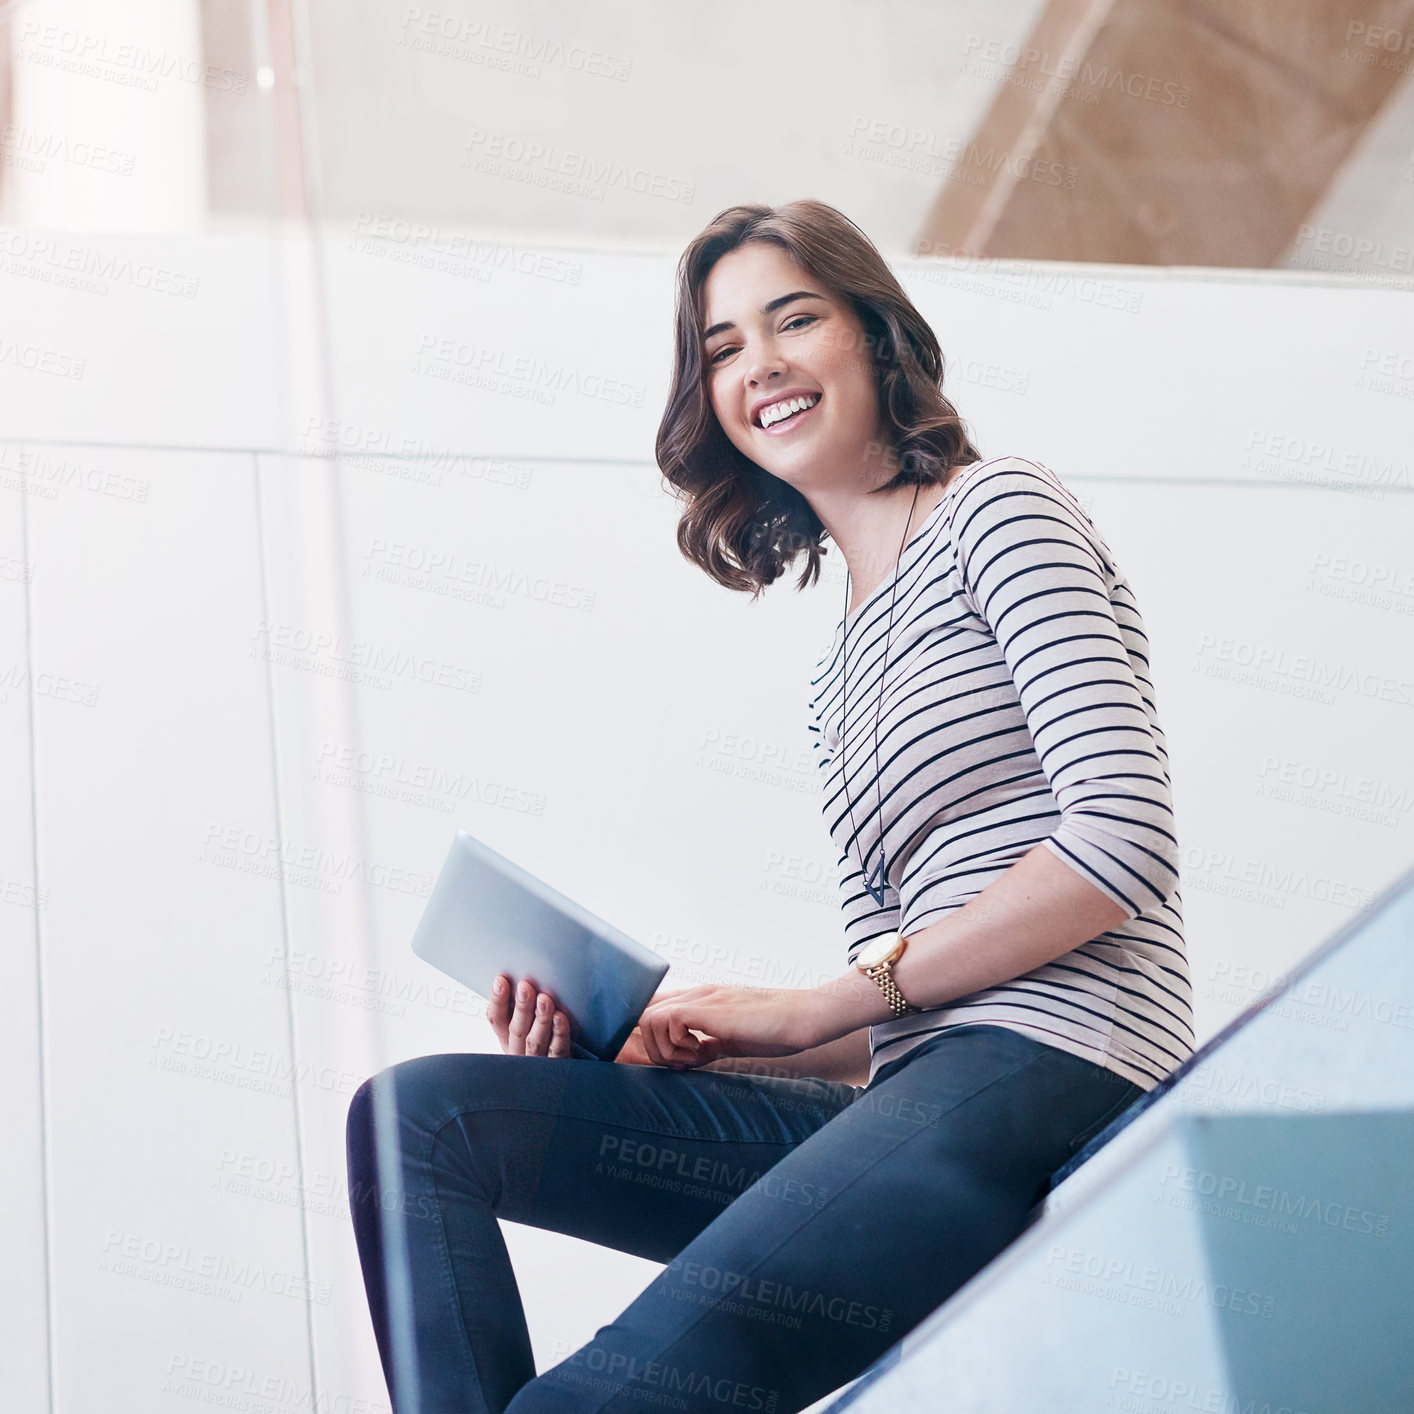 Buy stock photo Portrait of a young businesswoman using a digital tablet on the stairs in a modern office